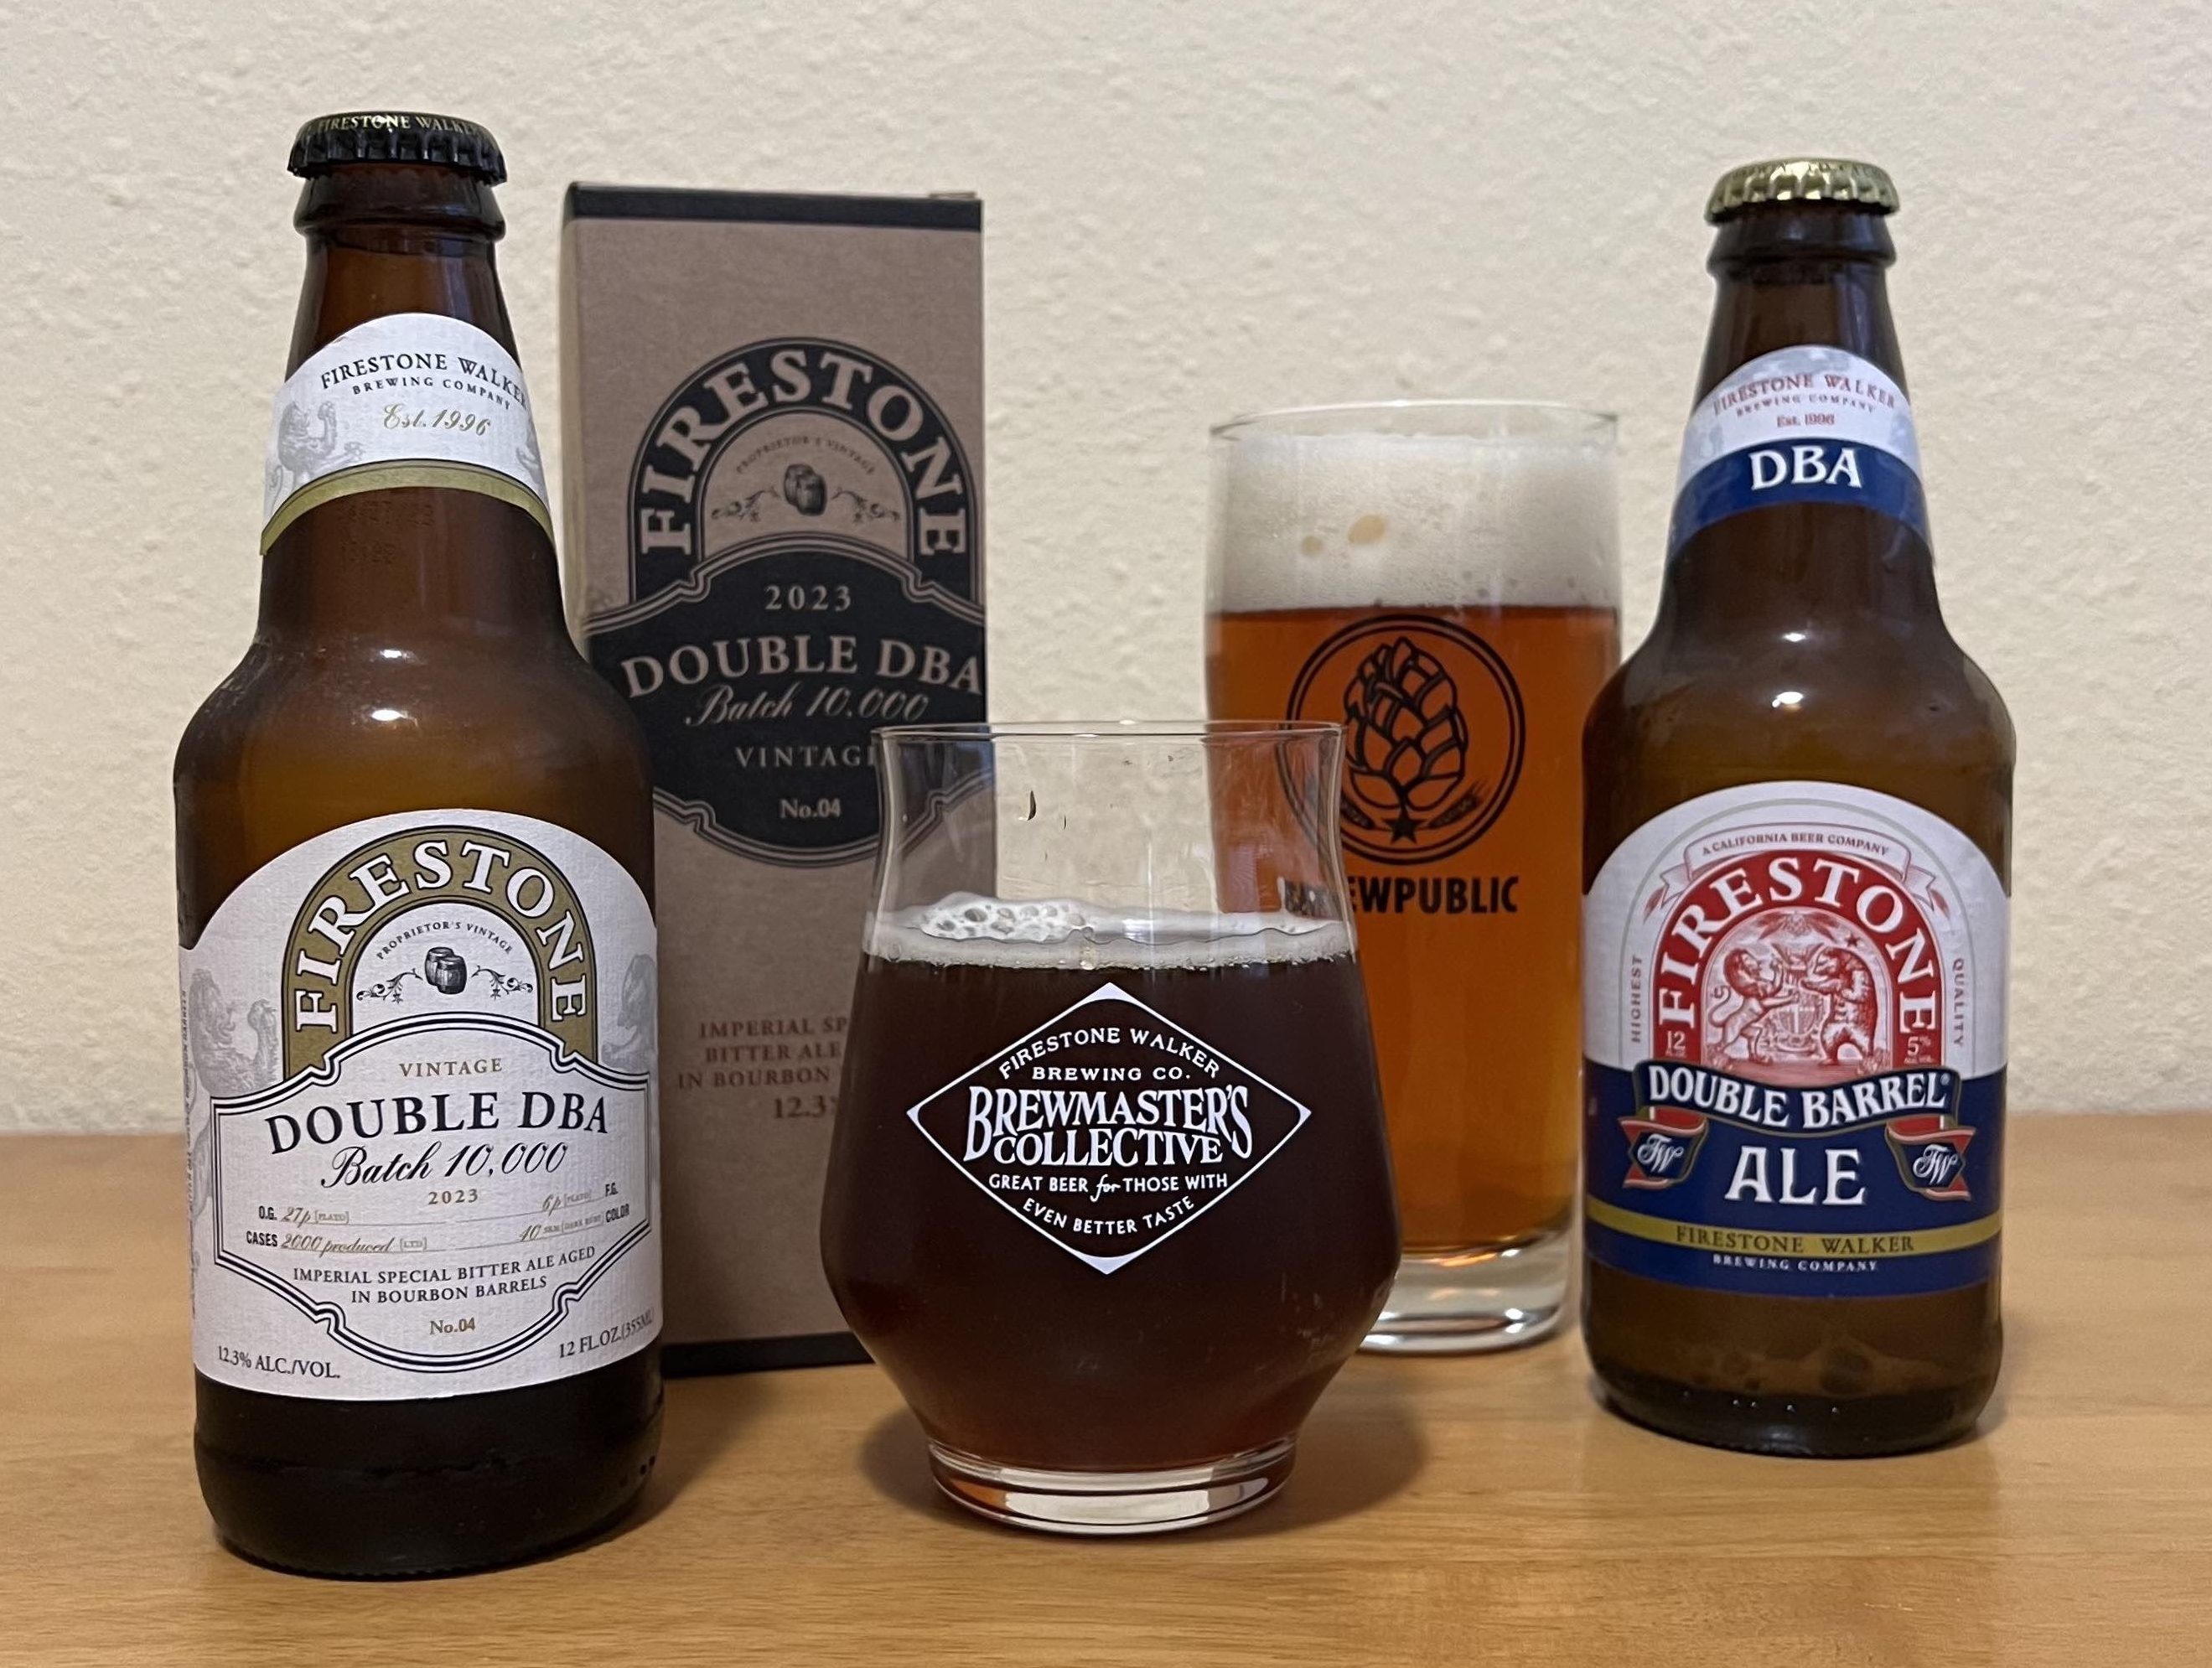 Firestone Walker celebrates 10,000 brews in Paso Robles, California with Double DBA Batch 10,000. It was interesting to sample this beer against the brewery's Double Barrel Ale.